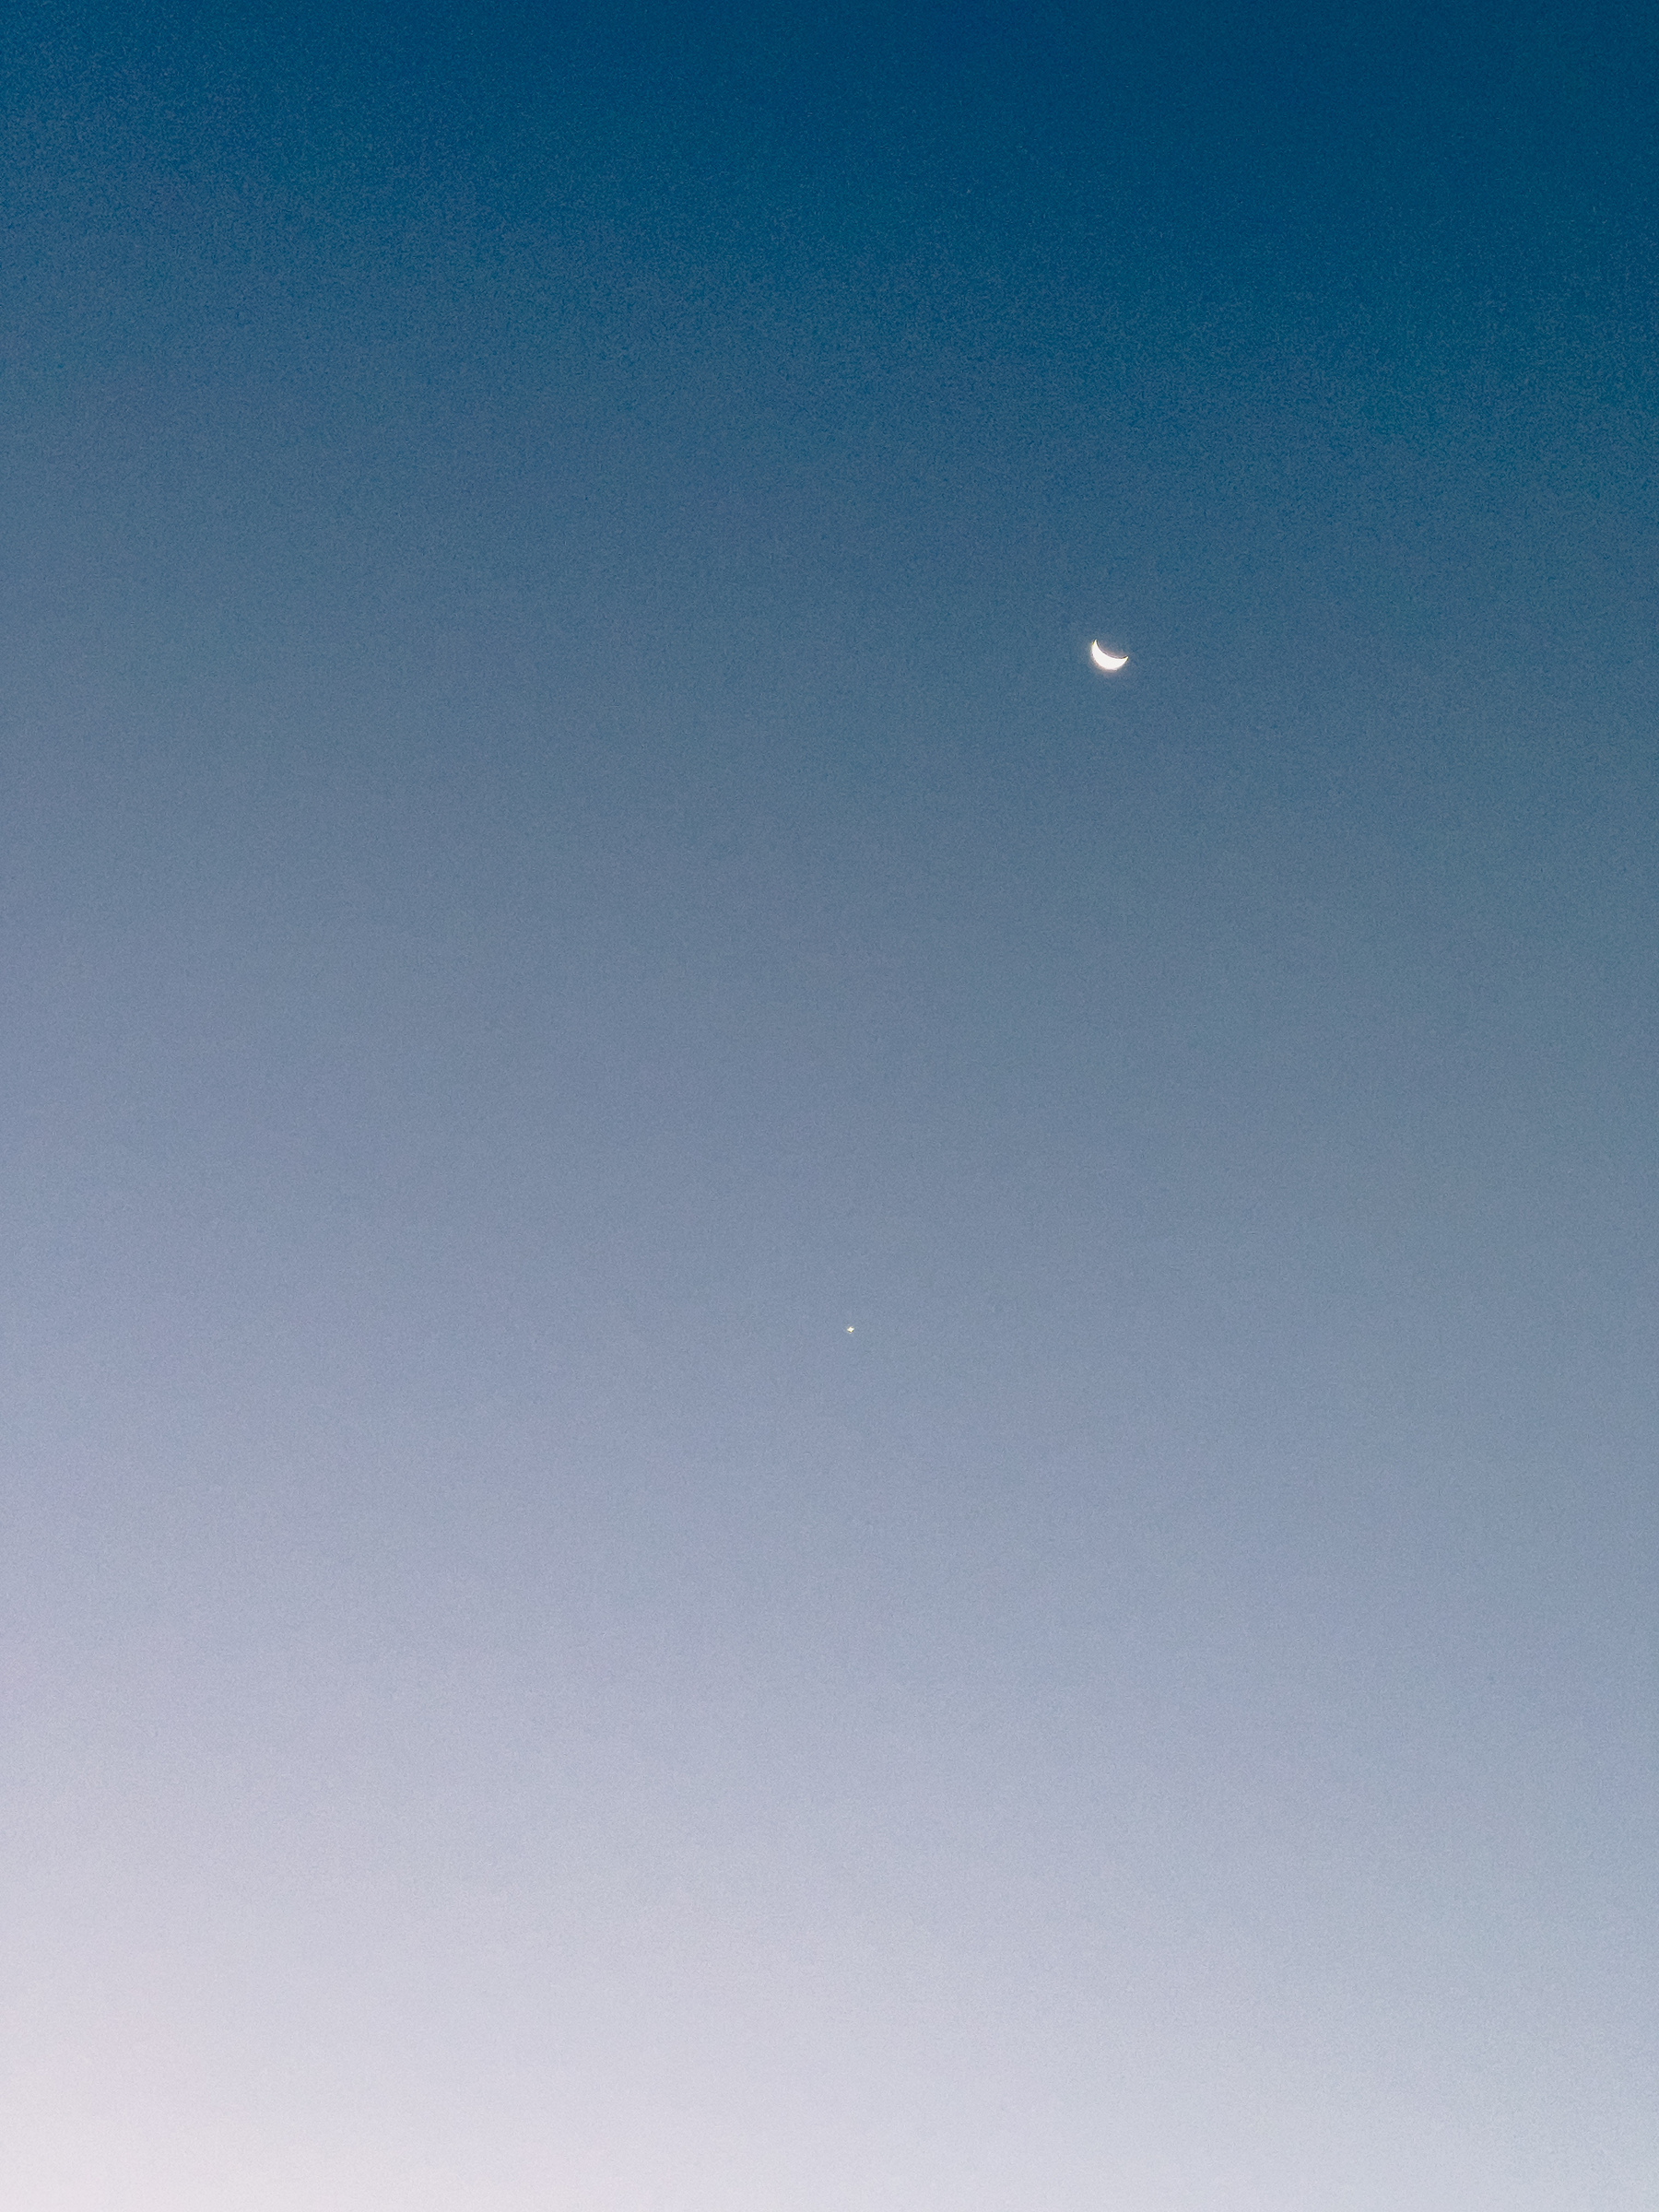 Venus and crescent moon in early morning sky.